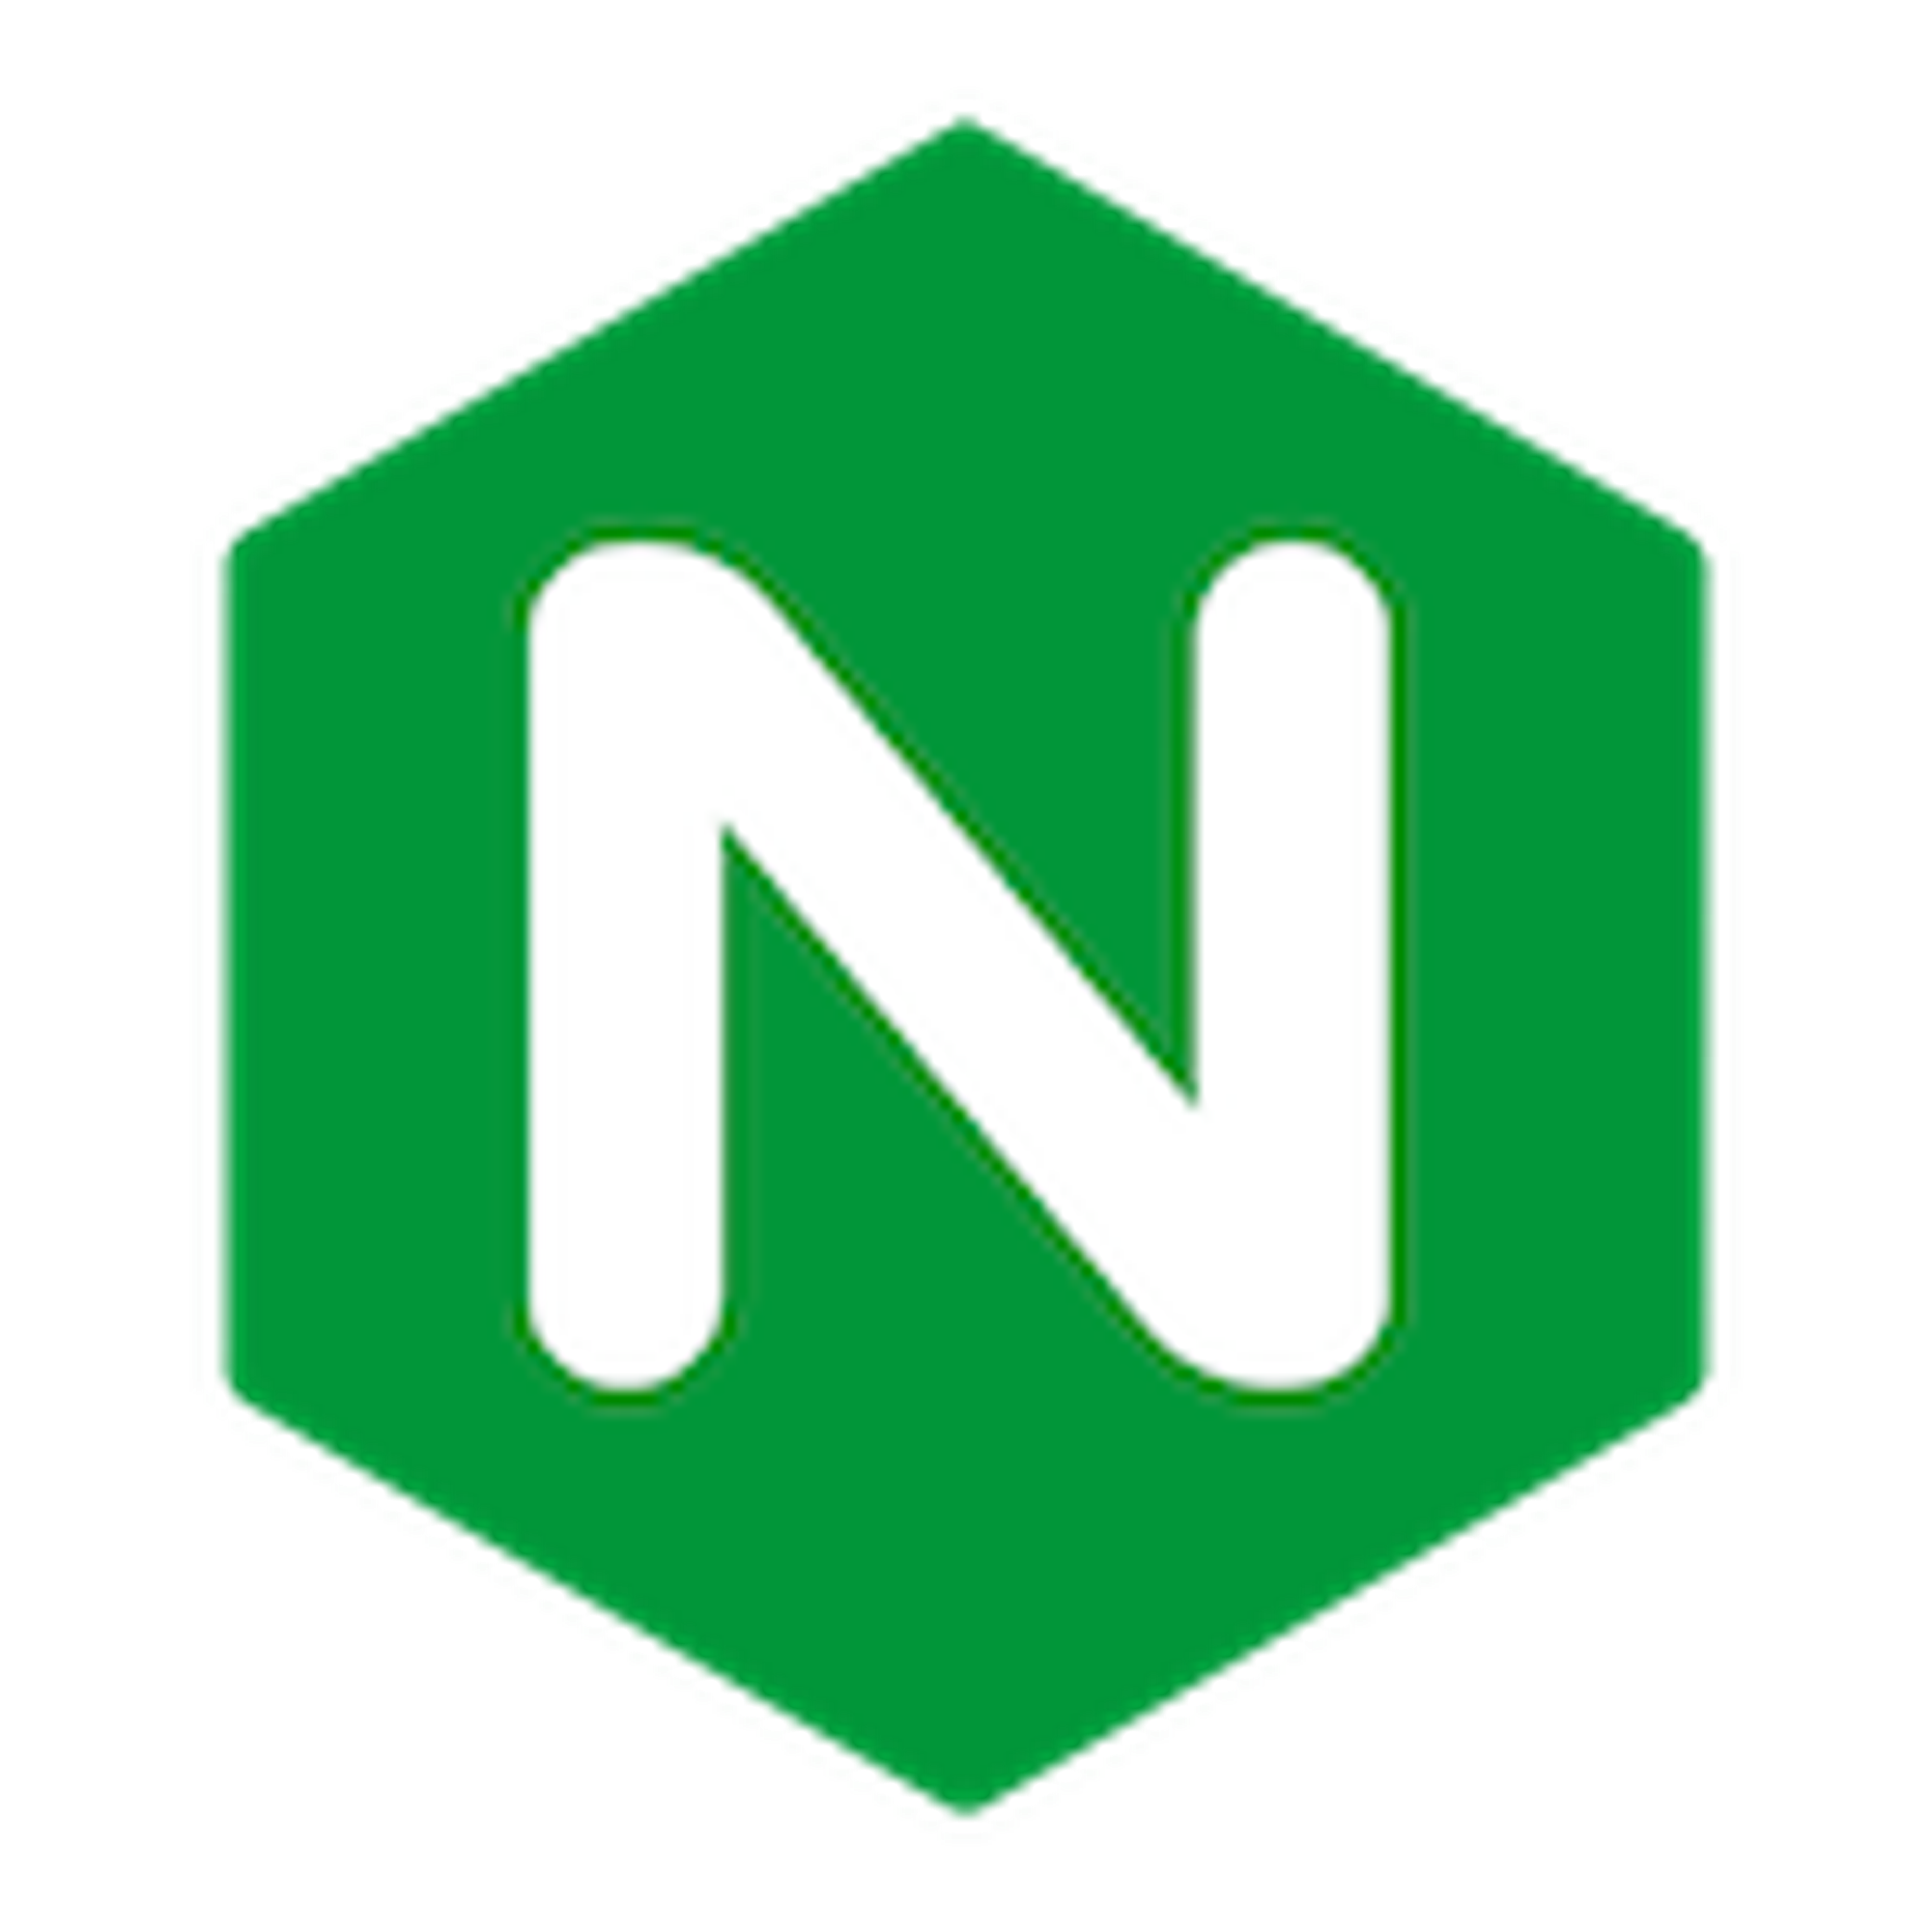 Getting a Handle on Basic NGINX configuration